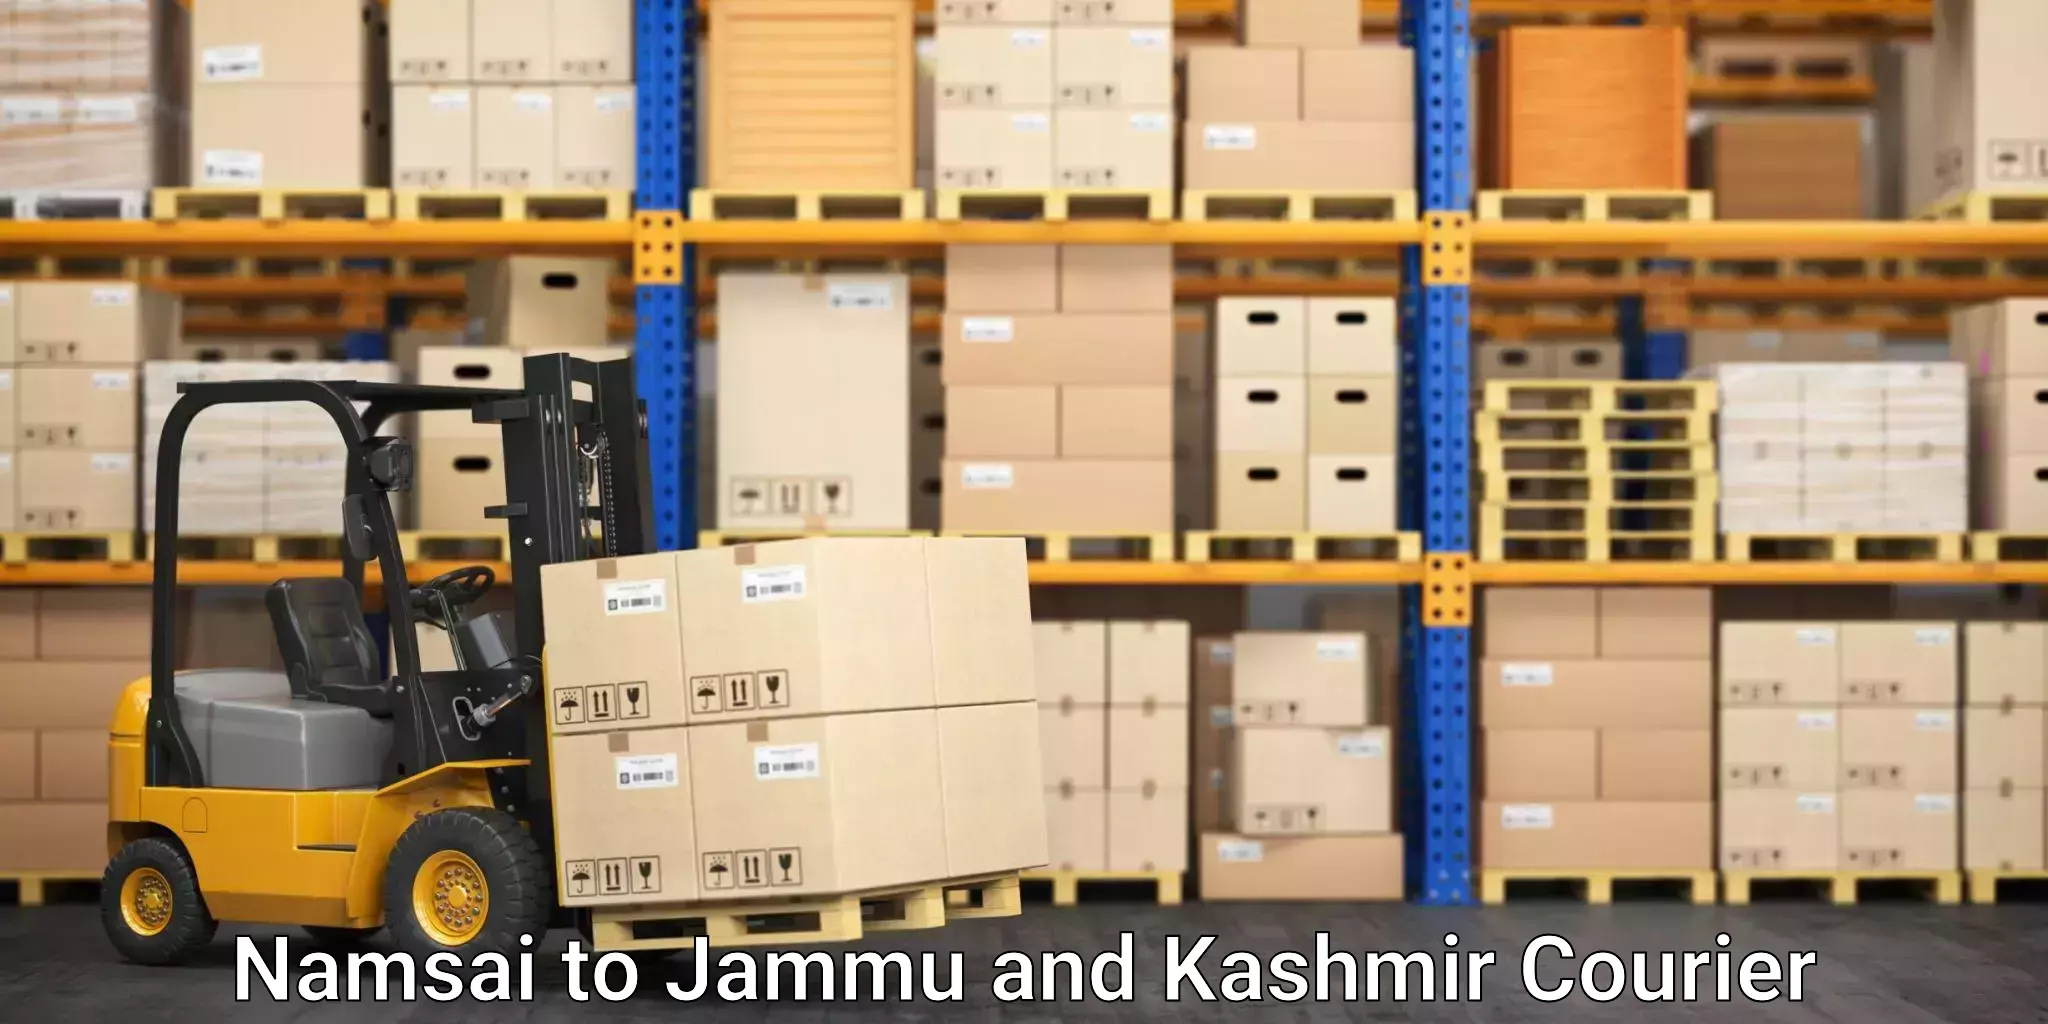 Express delivery network Namsai to Jammu and Kashmir